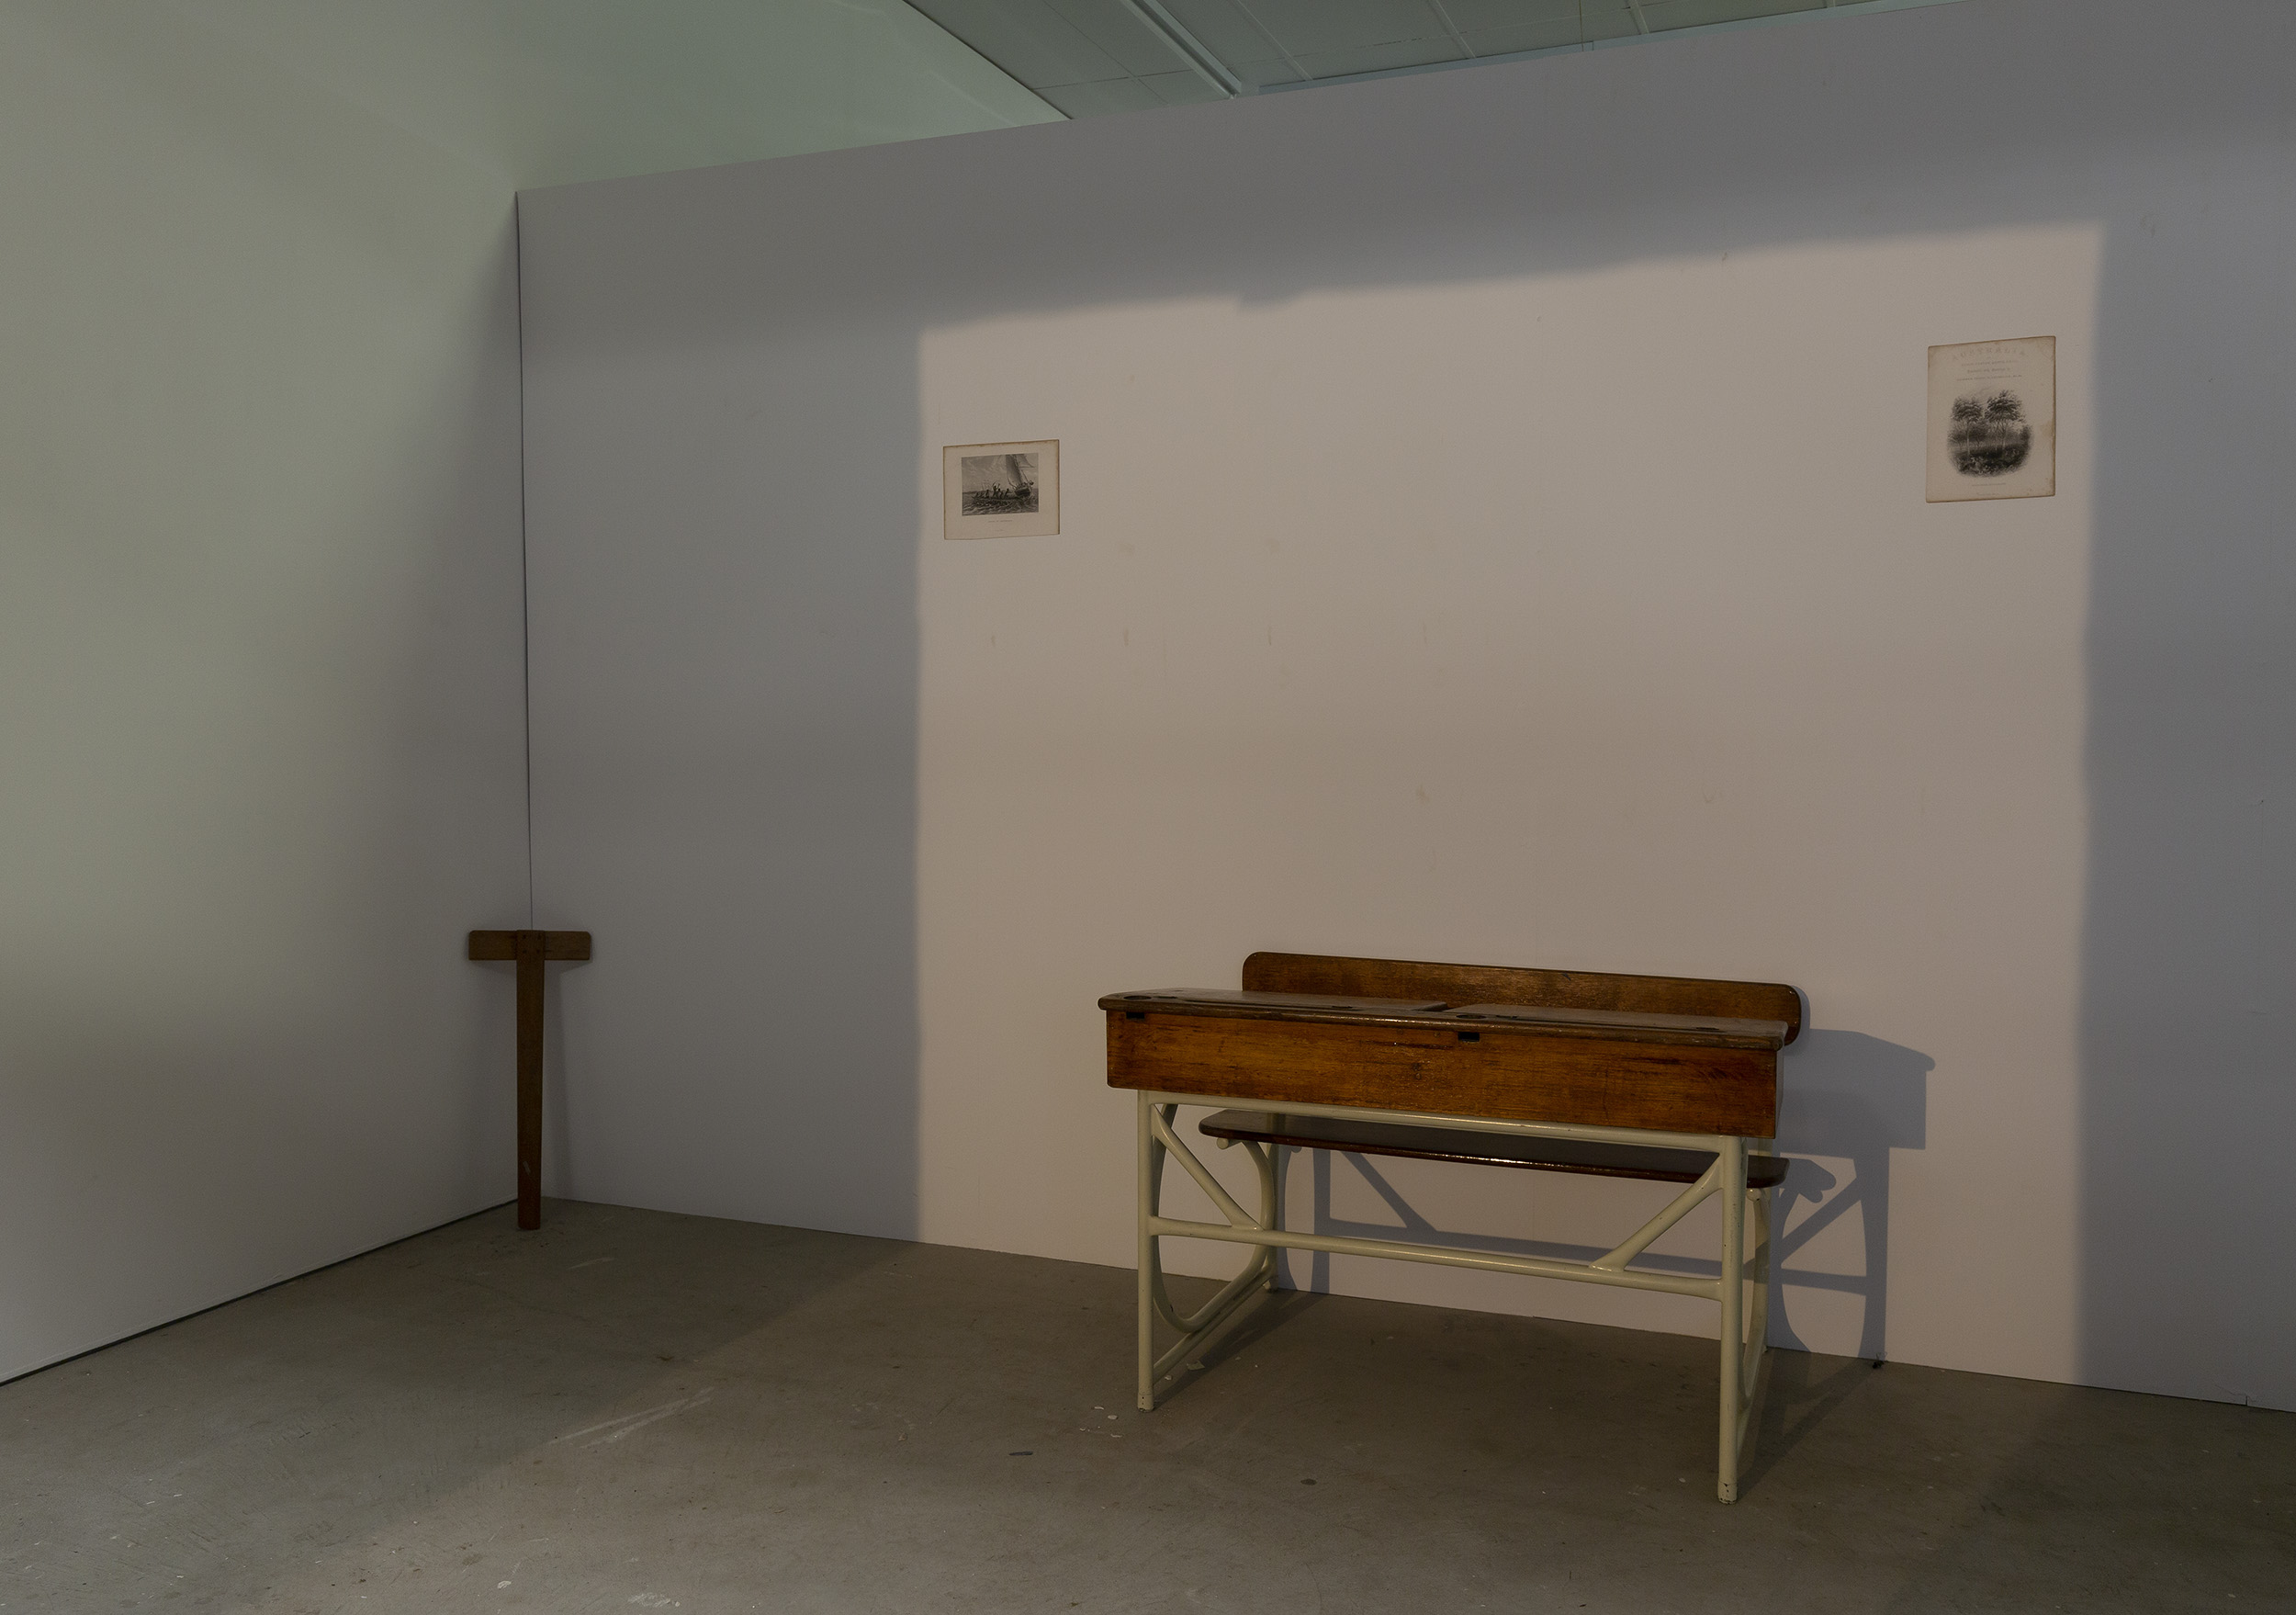 Installation view of Archie Moore’s exhibition Dwelling (Victorian Issue), presented at Gertrude Contemporary, 2022. Photo: Christian Capurro.